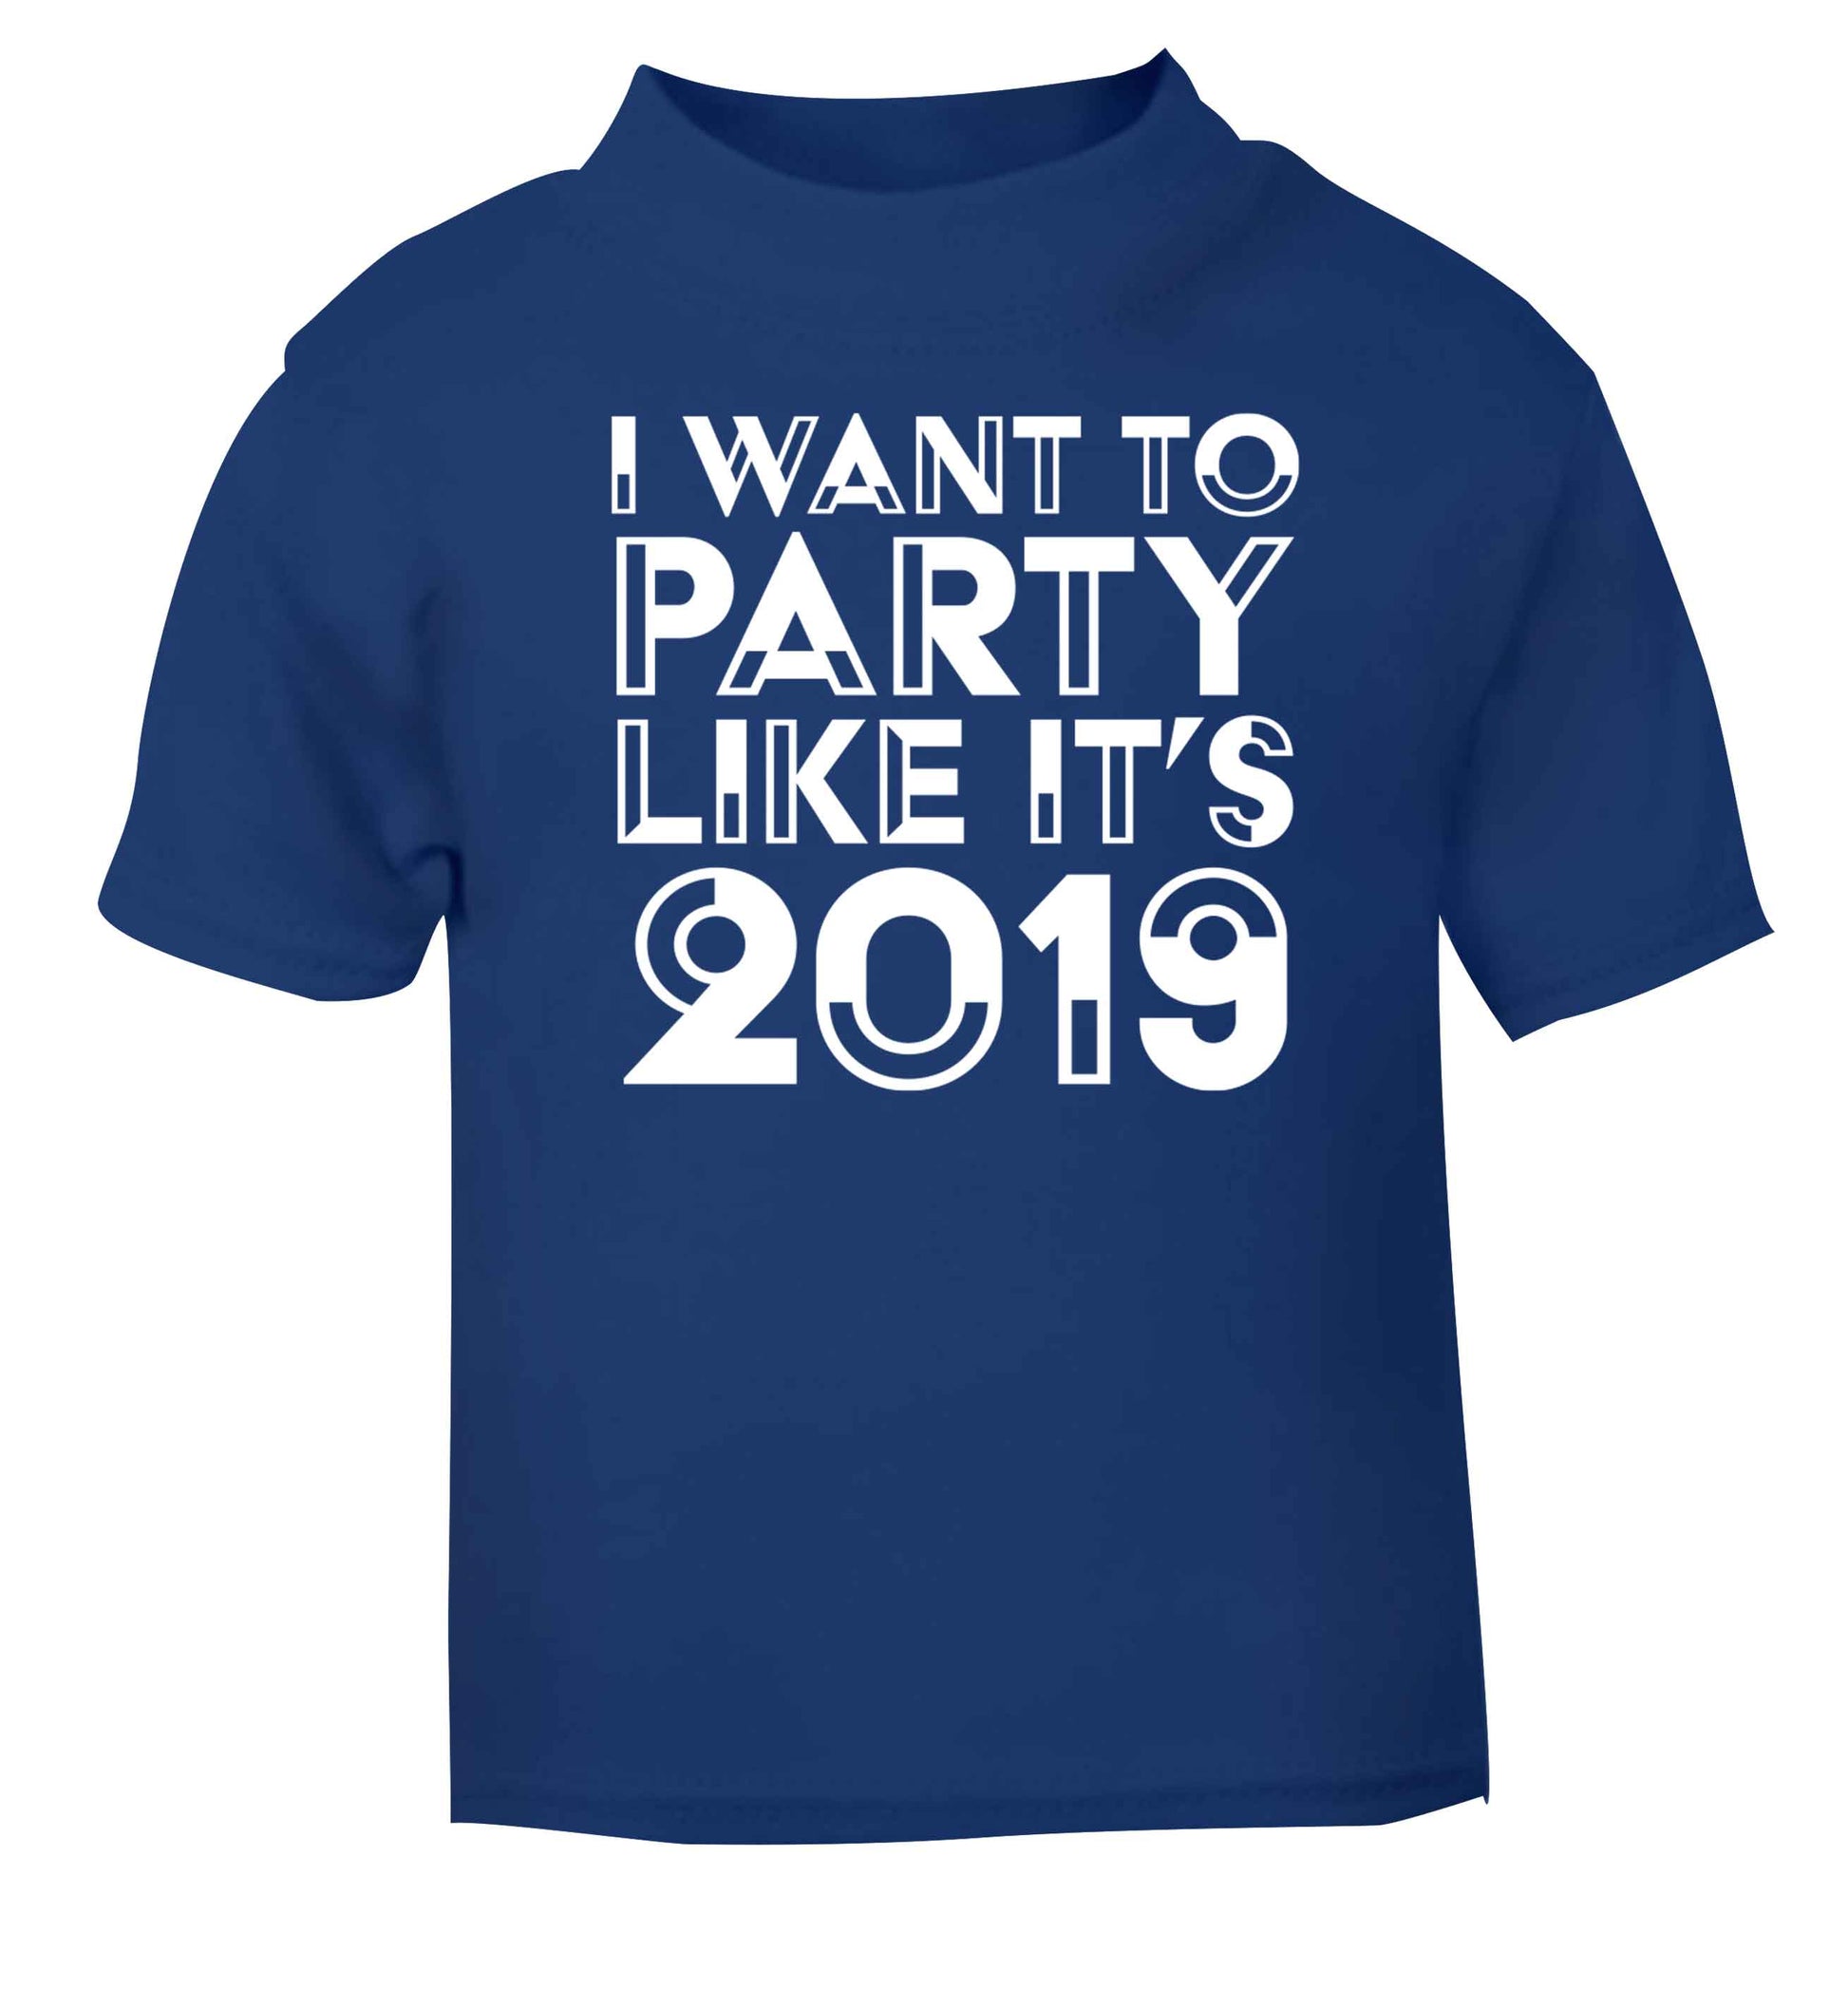 I want to party like it's 2019 blue baby toddler Tshirt 2 Years